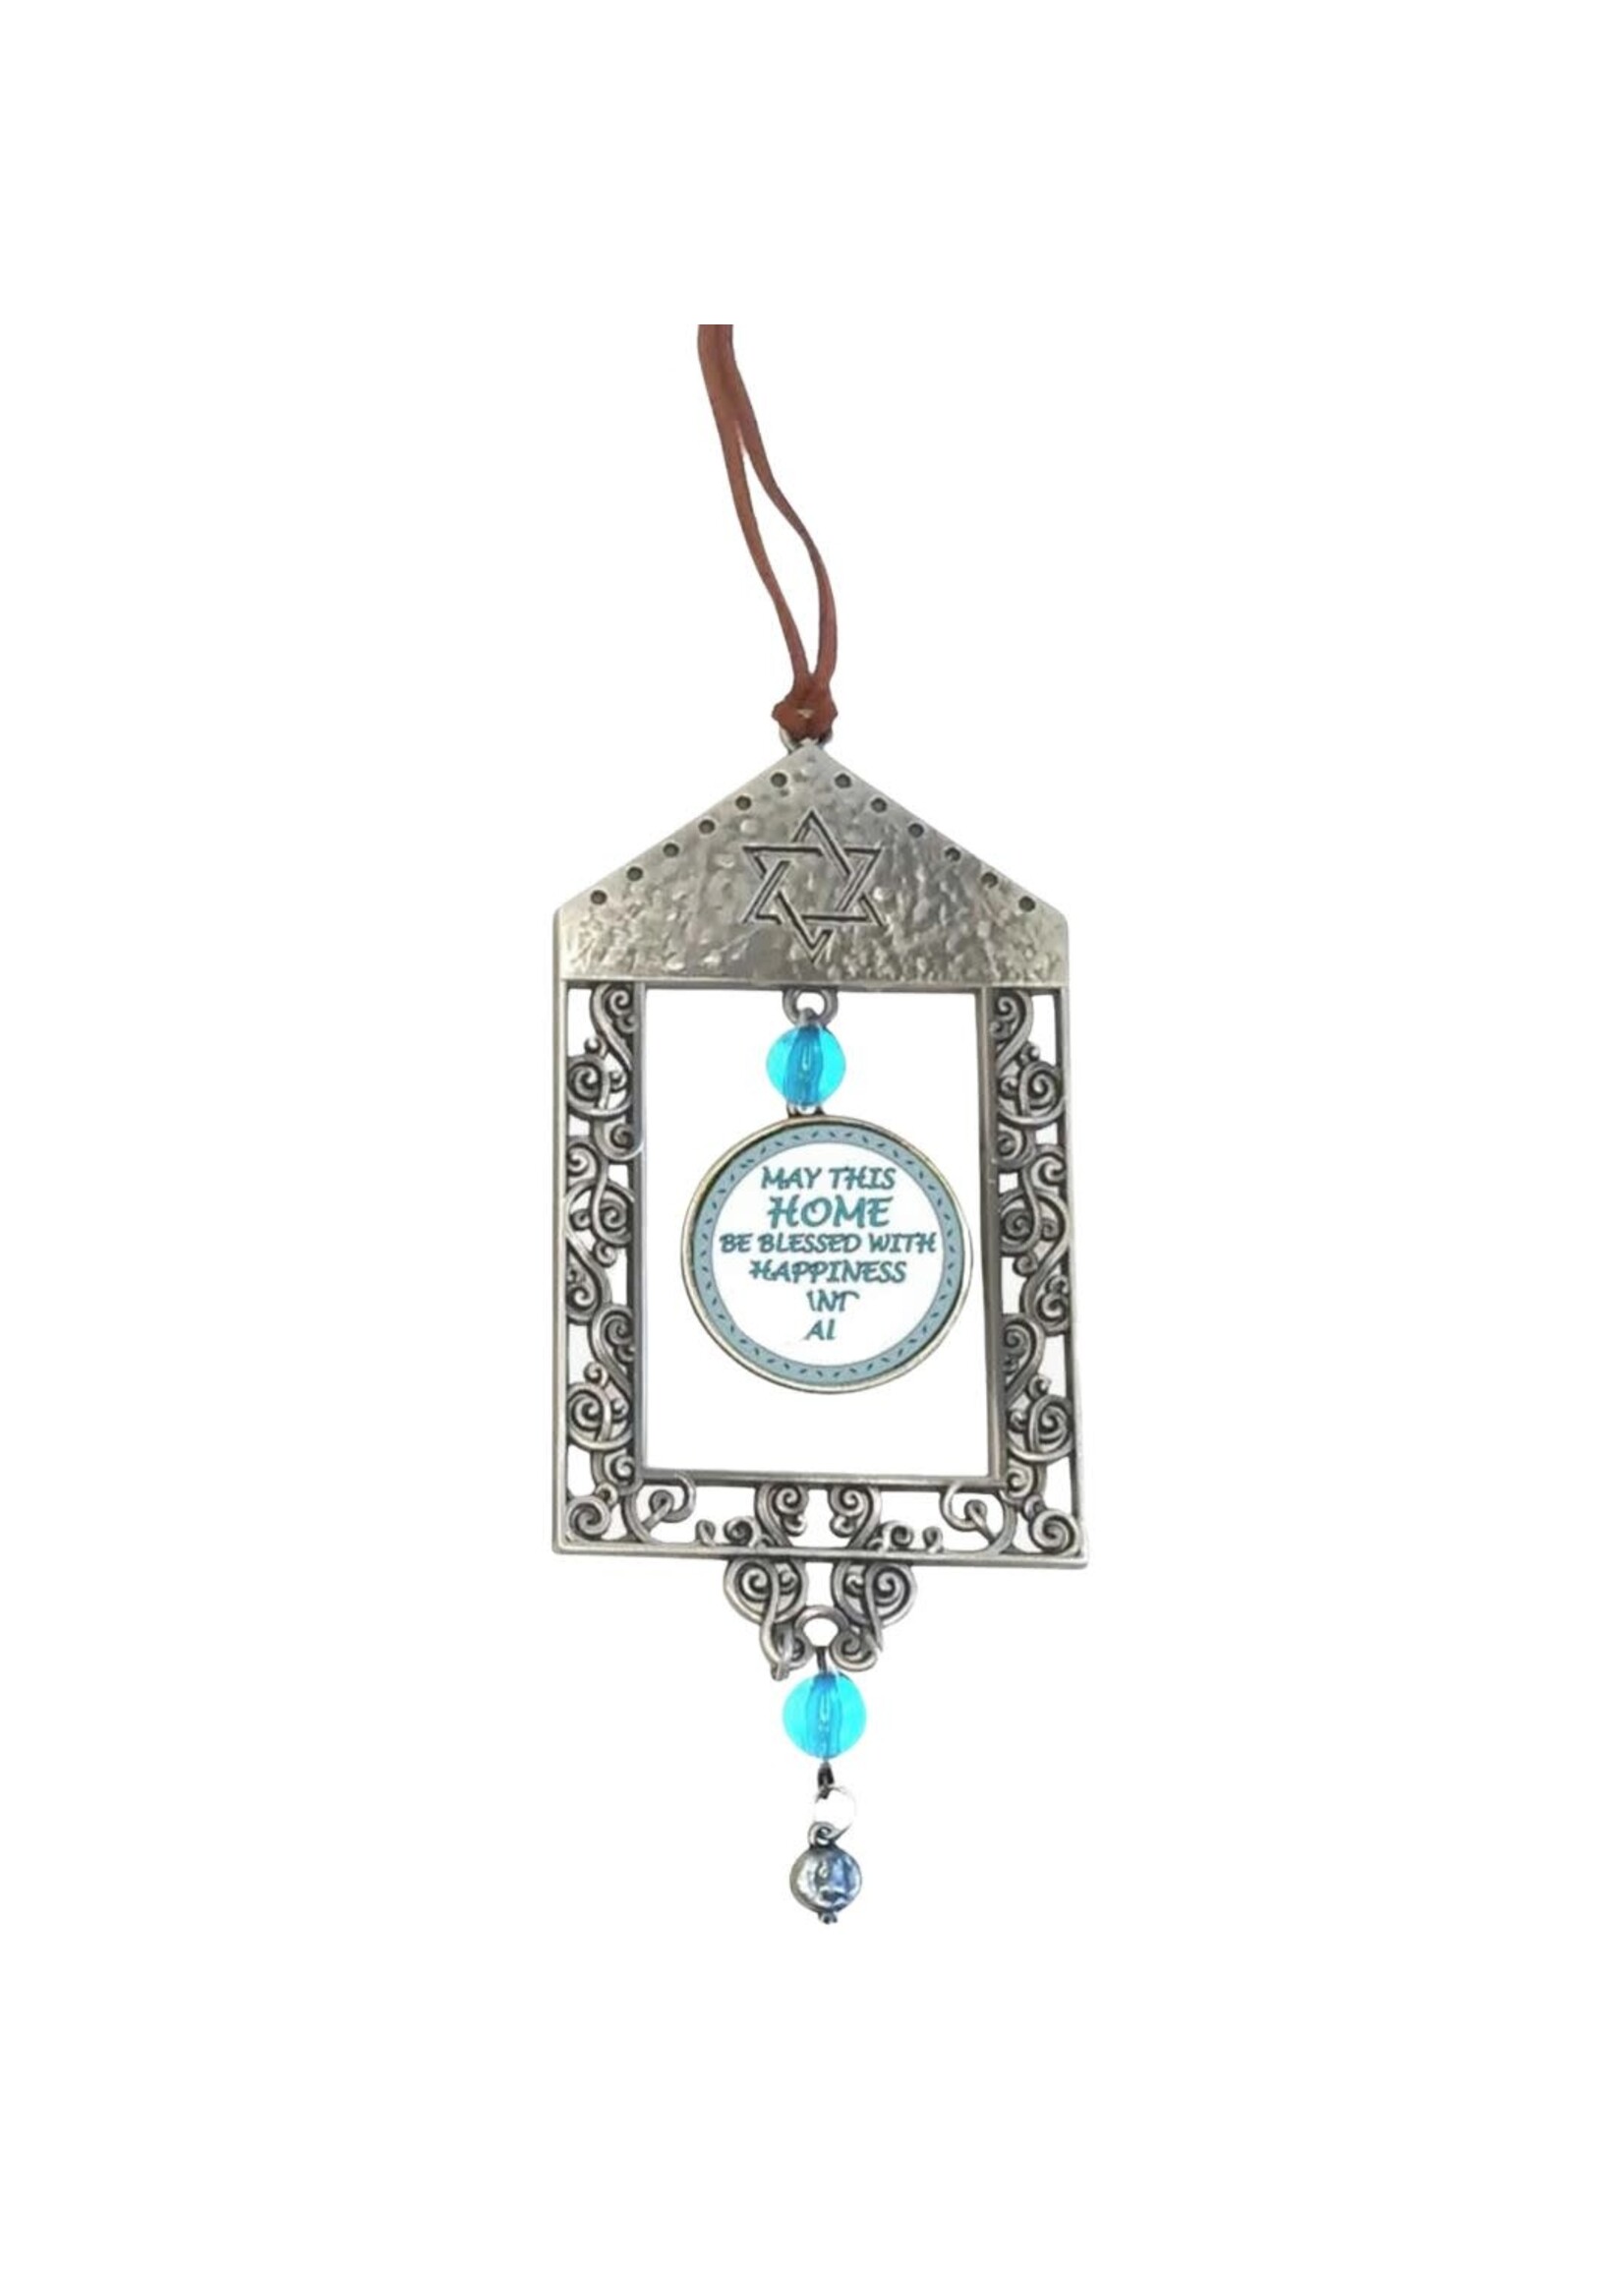 HOME BLESSING METAL HANGING DECOR